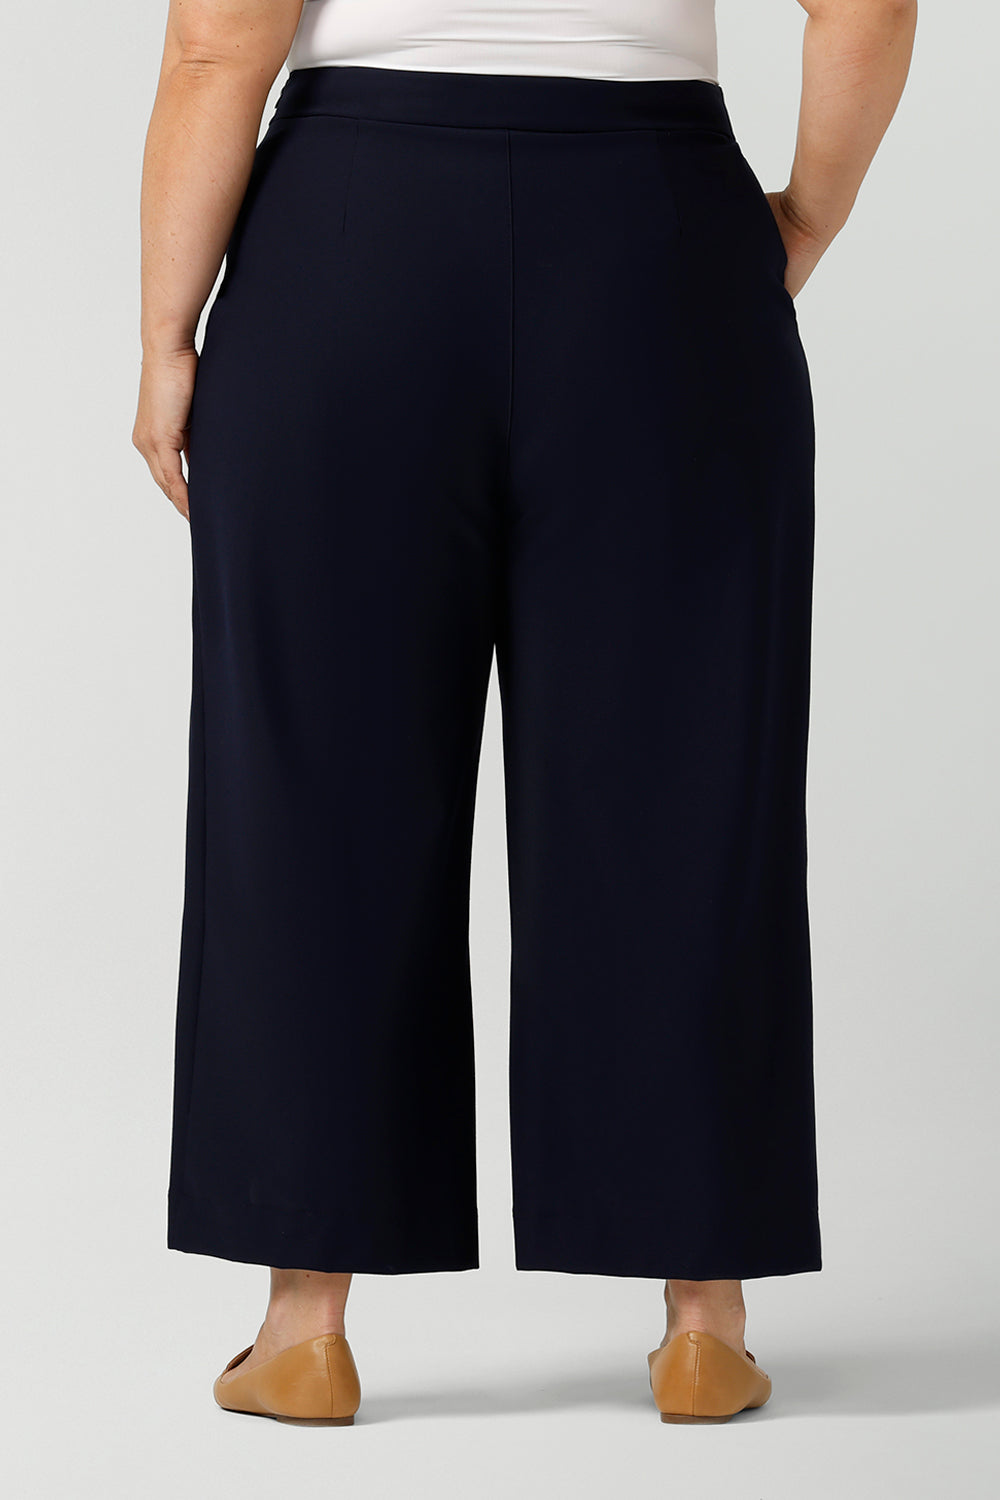 Back view of wide-leg, cropped length Hollis Culotte Pant in Navy blue. Featuring front pleats, side pockets and stretch jersey fabric these are comfortable, plus size work pants. This tailored trouser delivers quality office wear to women in sizes 8 to 24. - shop now at Australian ladies clothing brand, Leina & Fleur's online boutique.